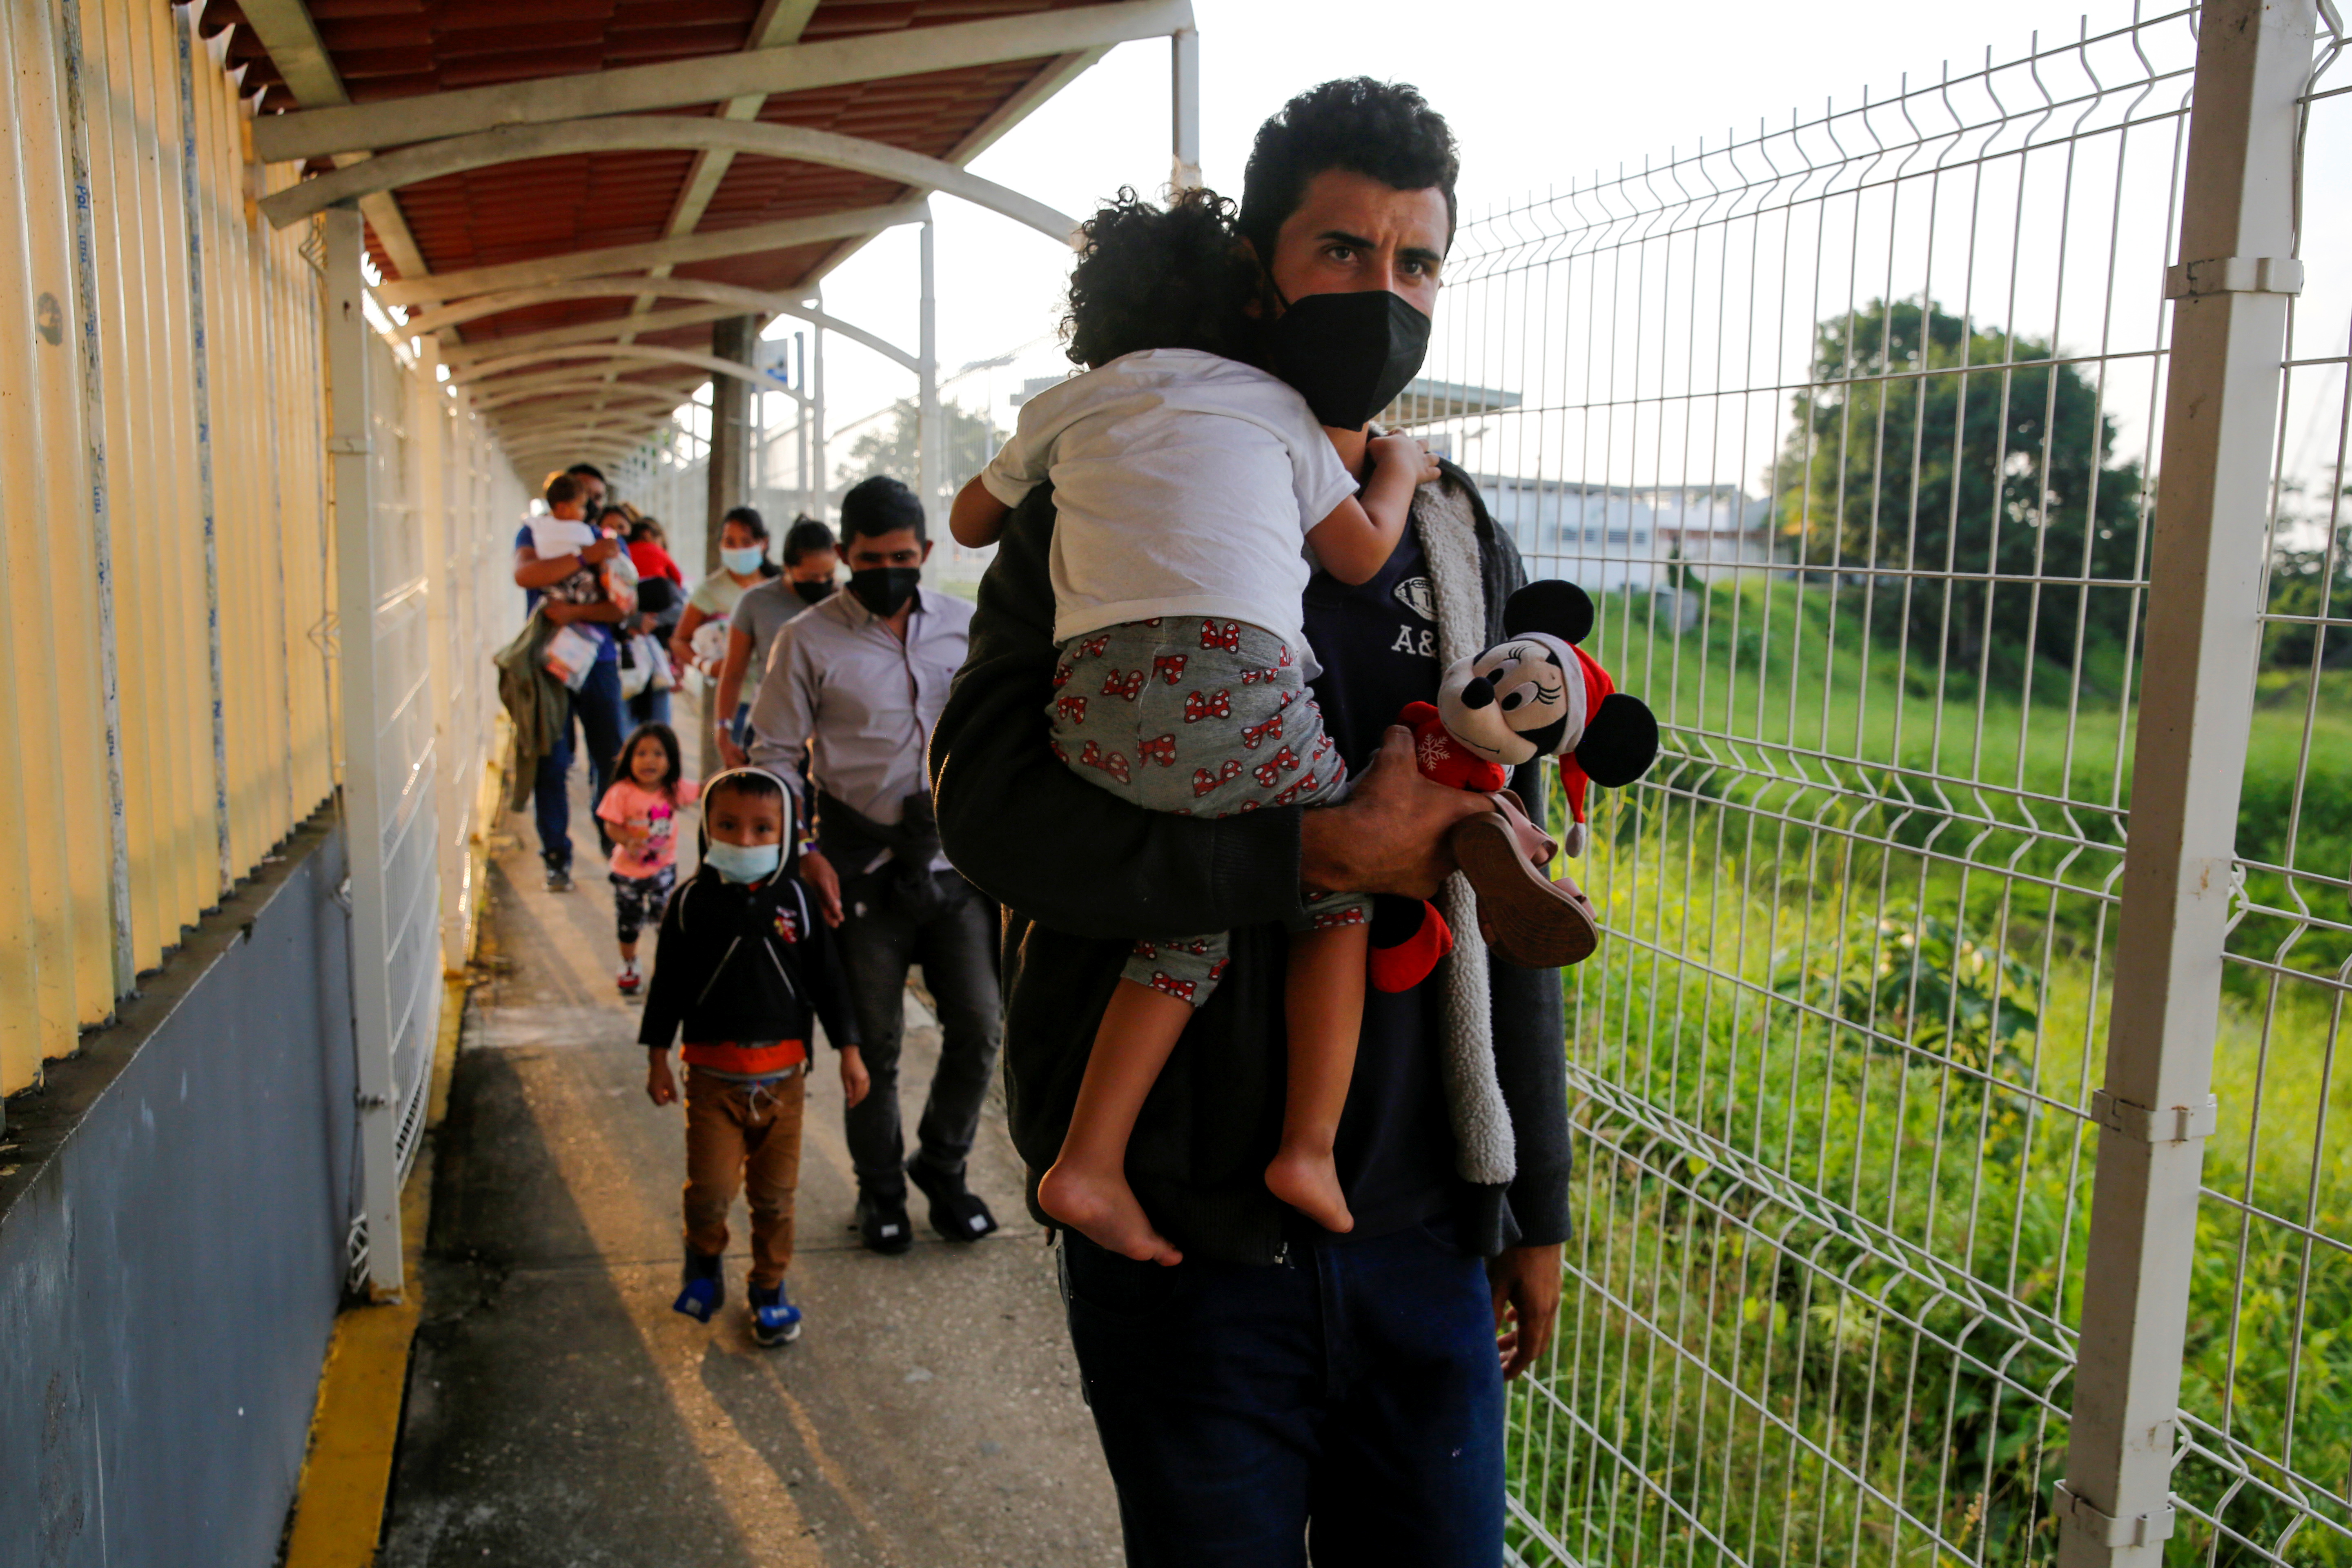 Central American migrants cross the border between Mexico and Guatemala, after being expelled by U.S. and Mexican officials, in El Ceibo, Guatemala August 16, 2021. REUTERS/Luis Echeverria